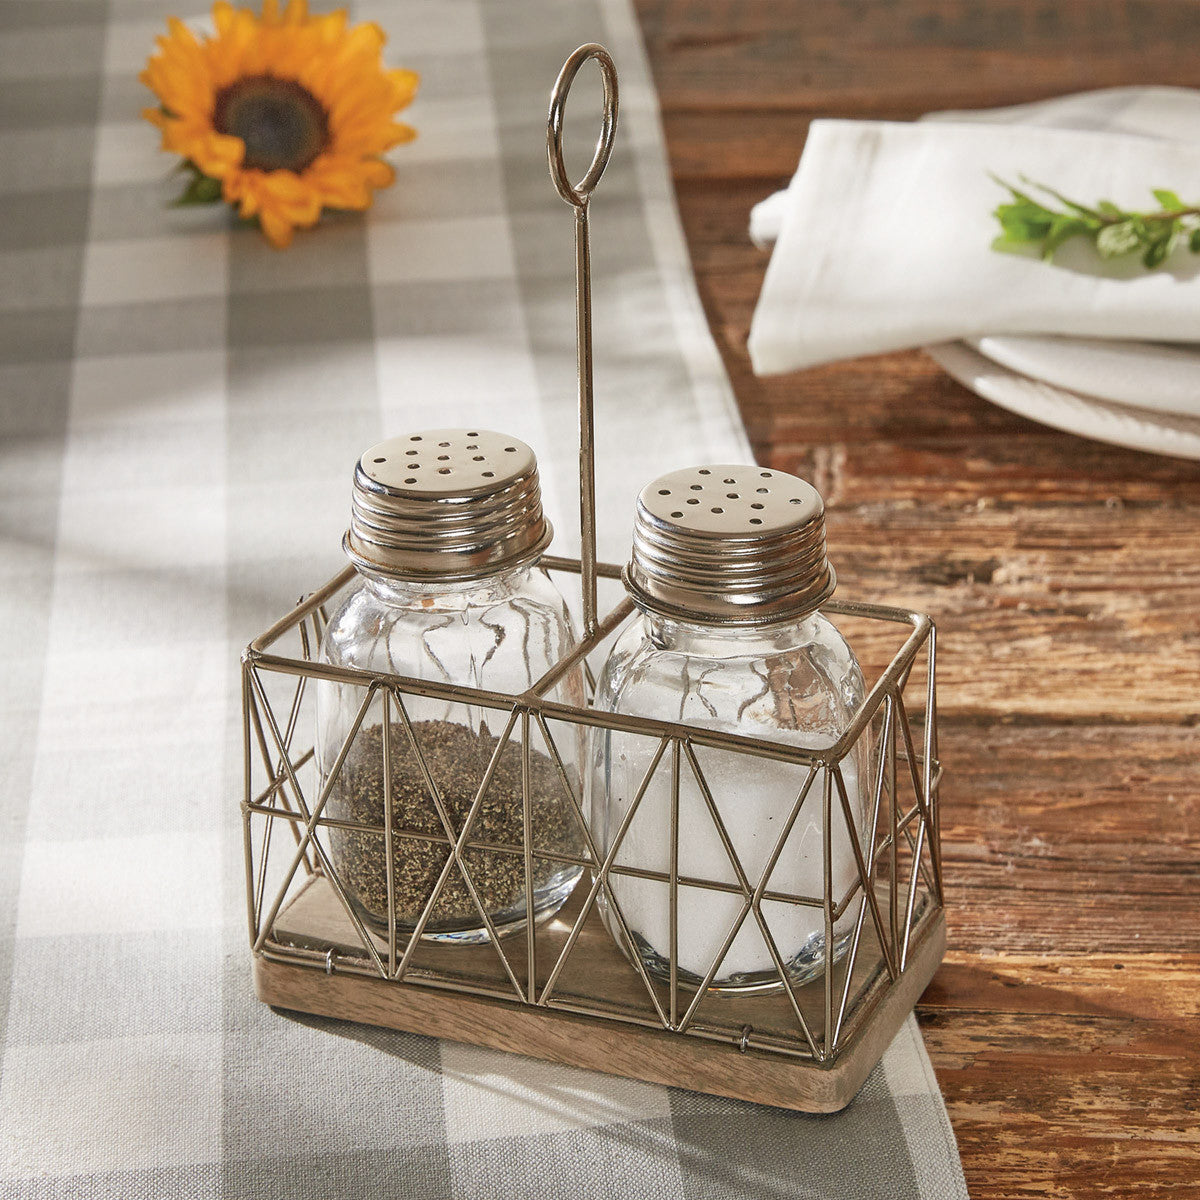 Galvanized Salt and Pepper Caddy with Ring